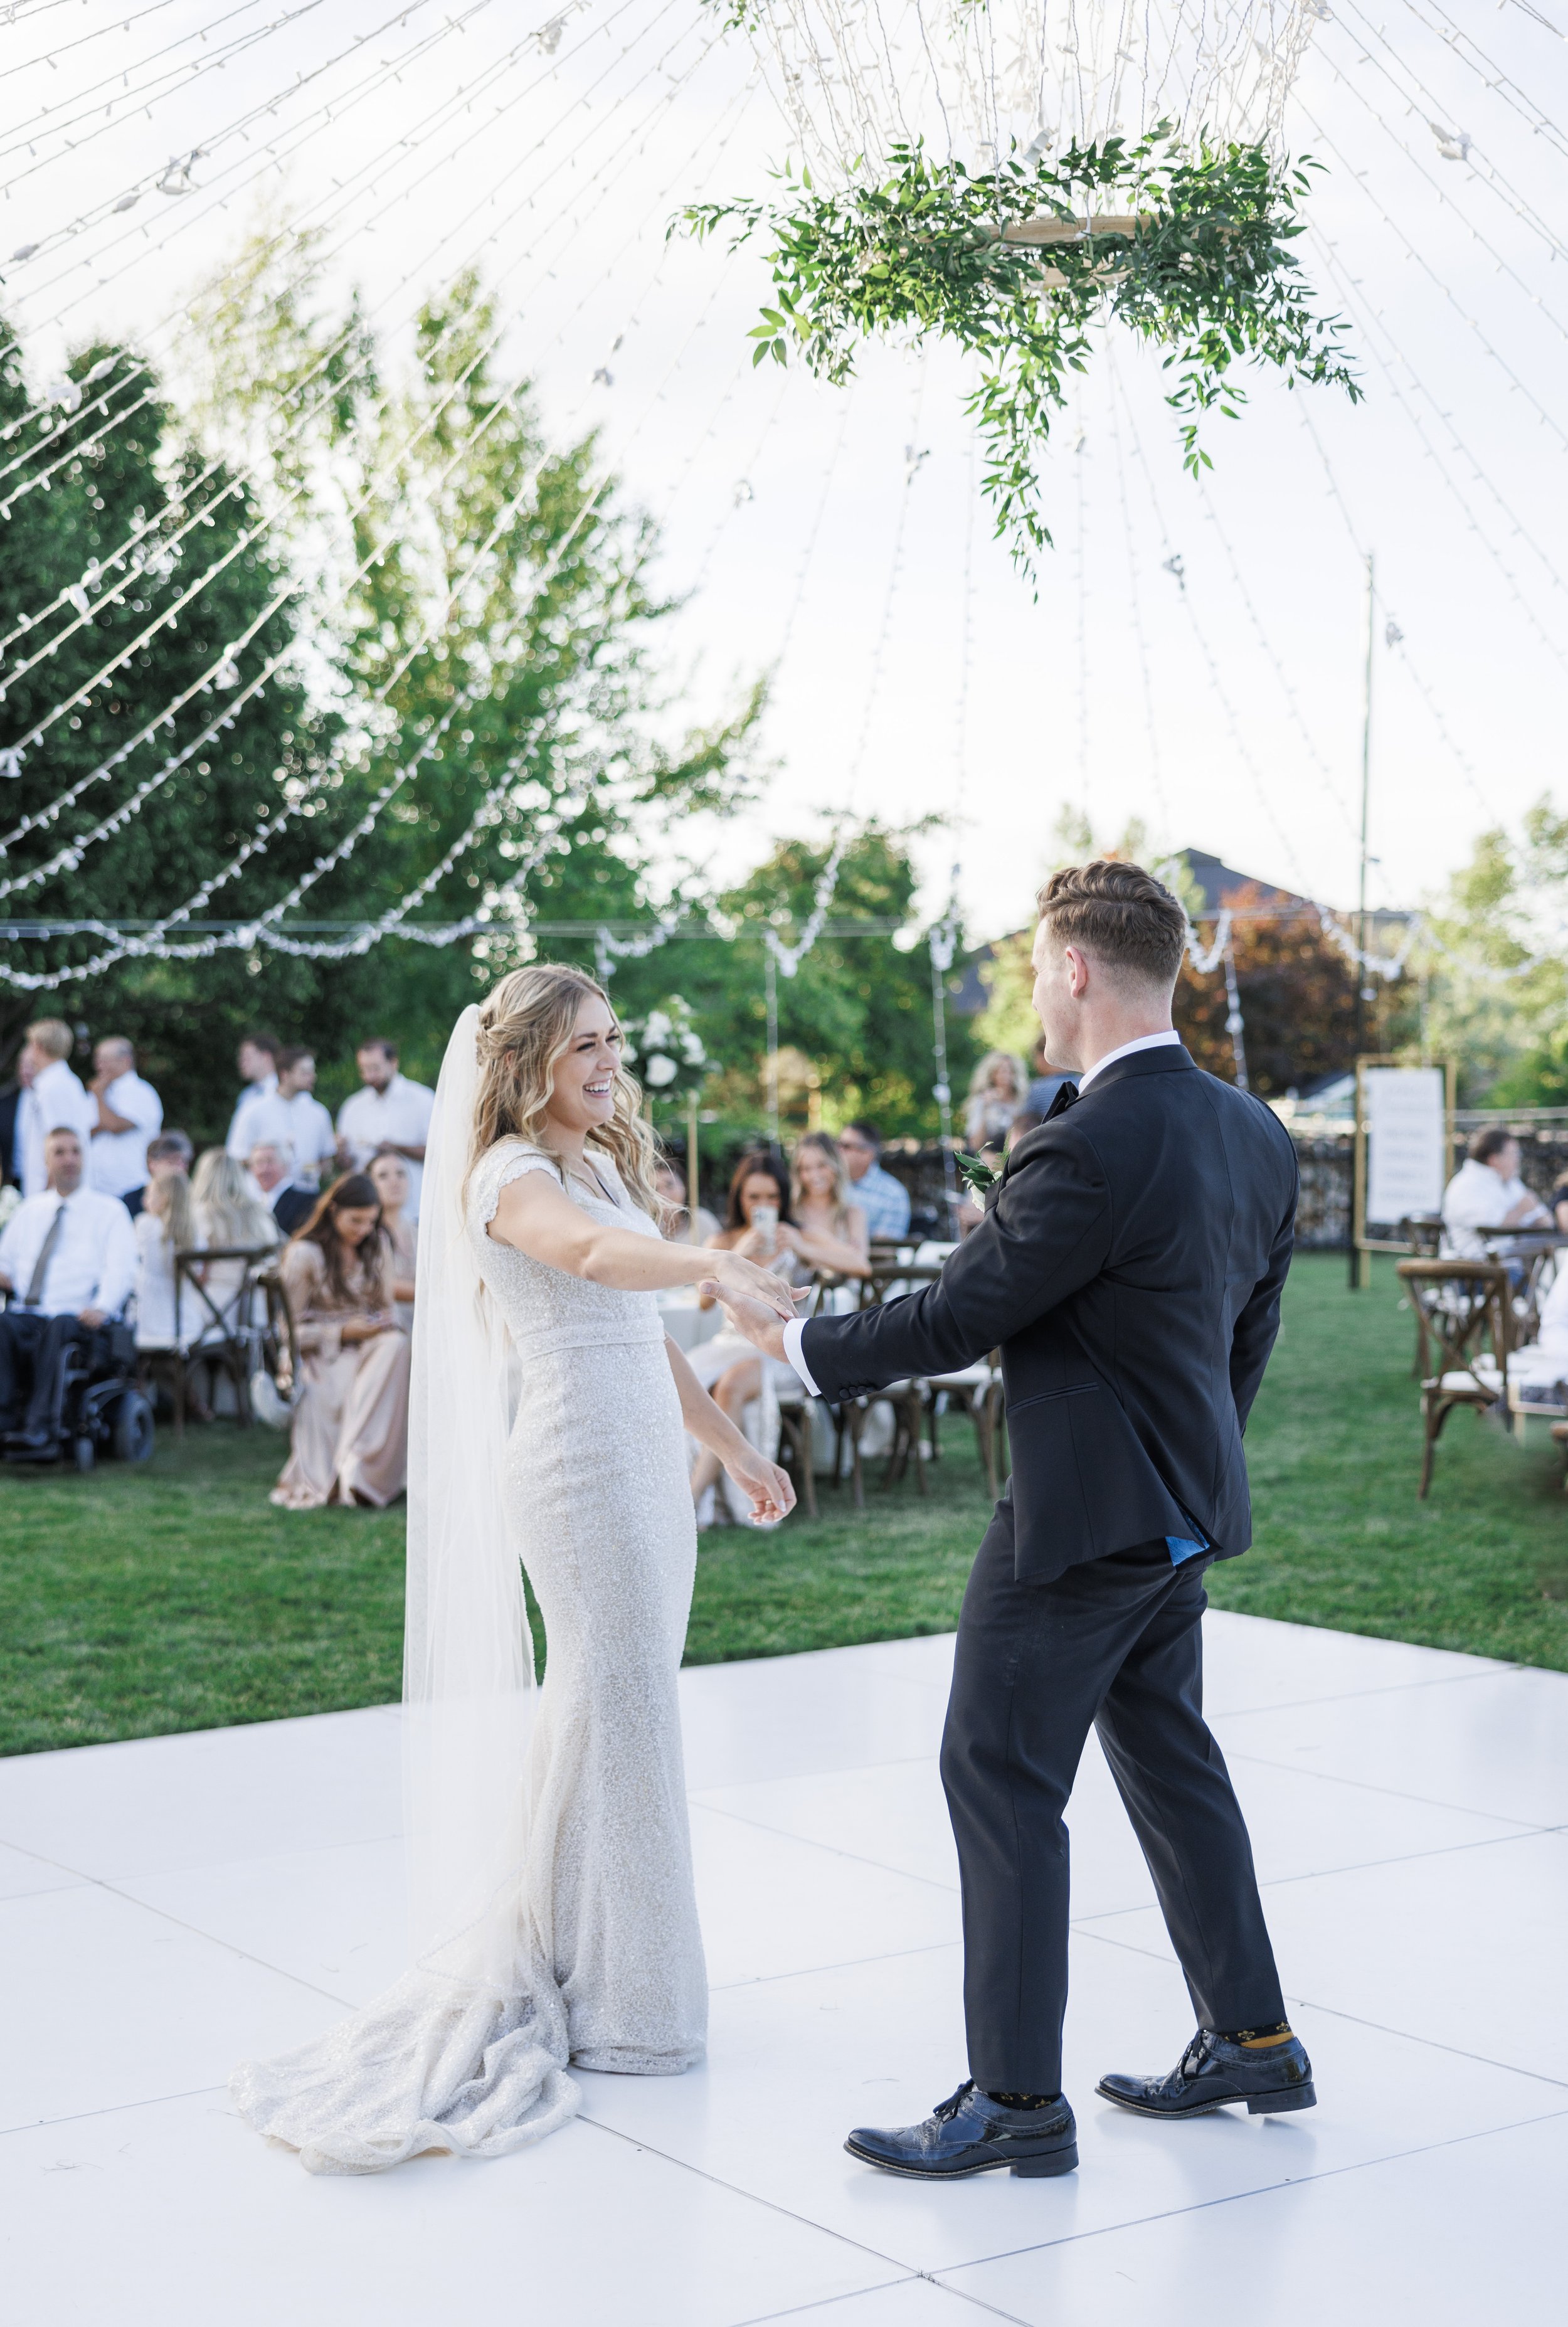  Bride and groom meeting in the middle of the dance floor at their outdoor summer wedding reception for their first dance as husband and wife. #savannarichardsonphotography #summerwedding #husbandandwife #firstdance #weddingdressinspo #groomhairstyle